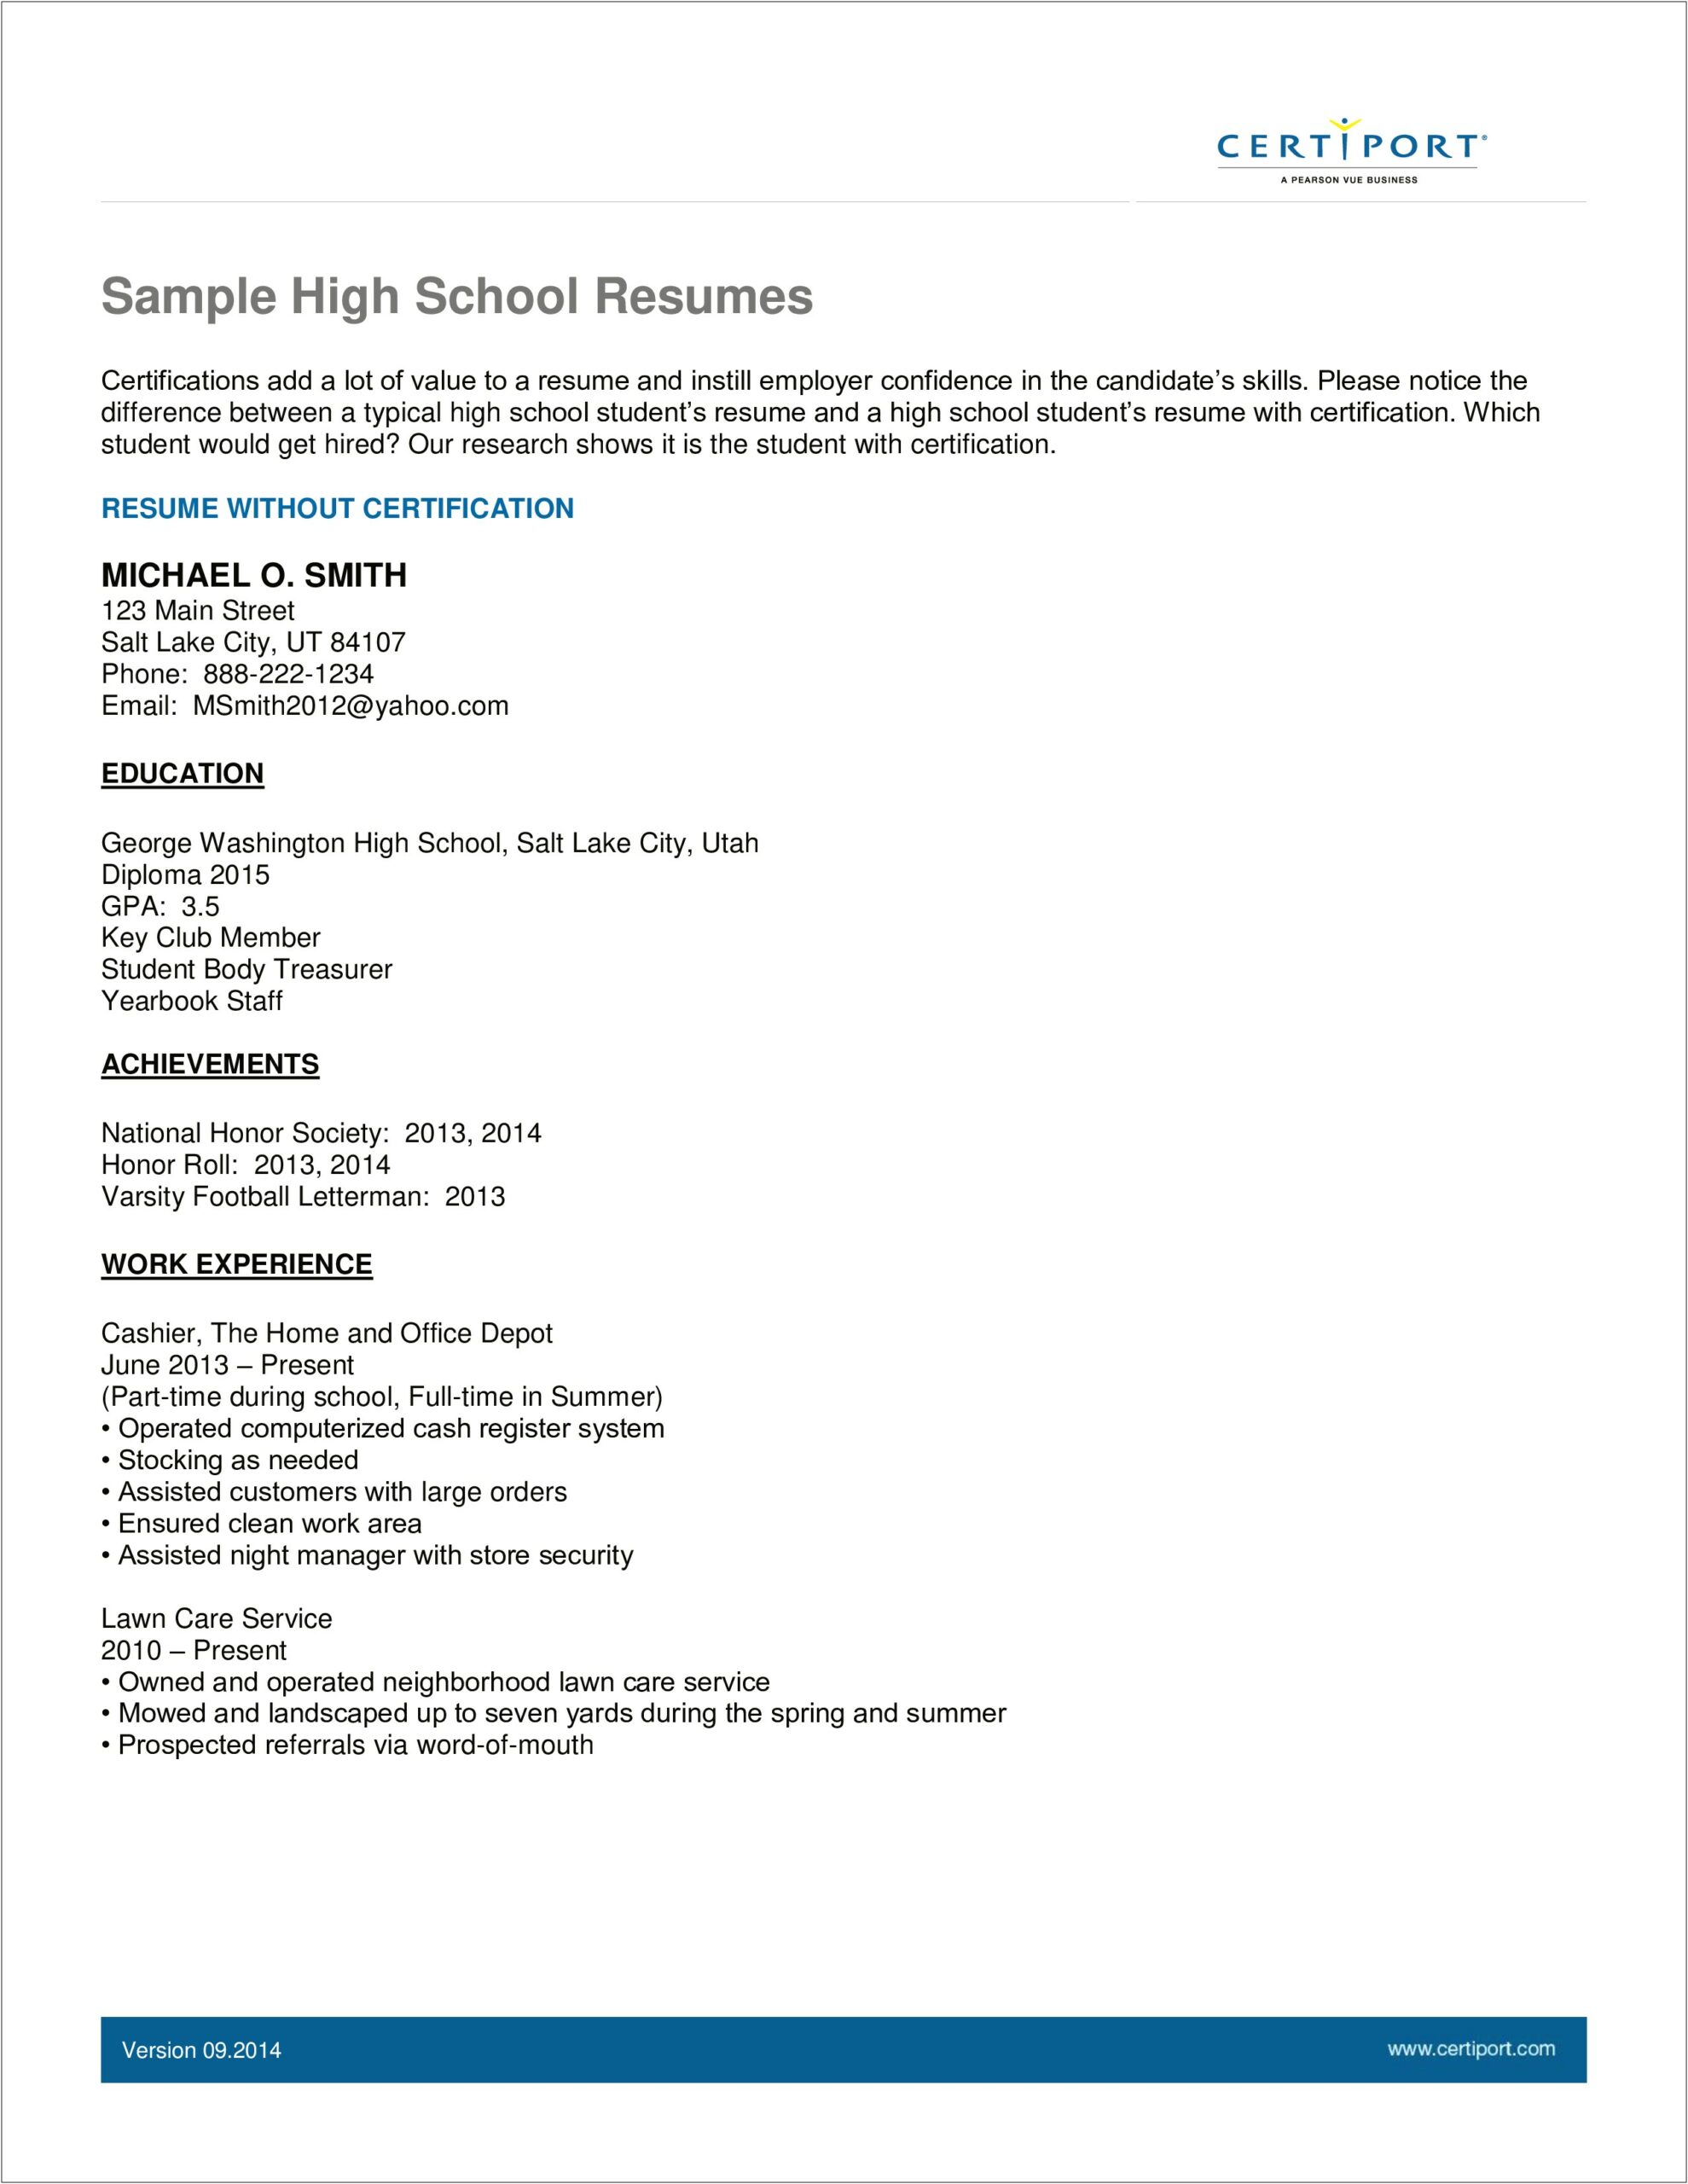 Sample Resume For Lawn Care Owner